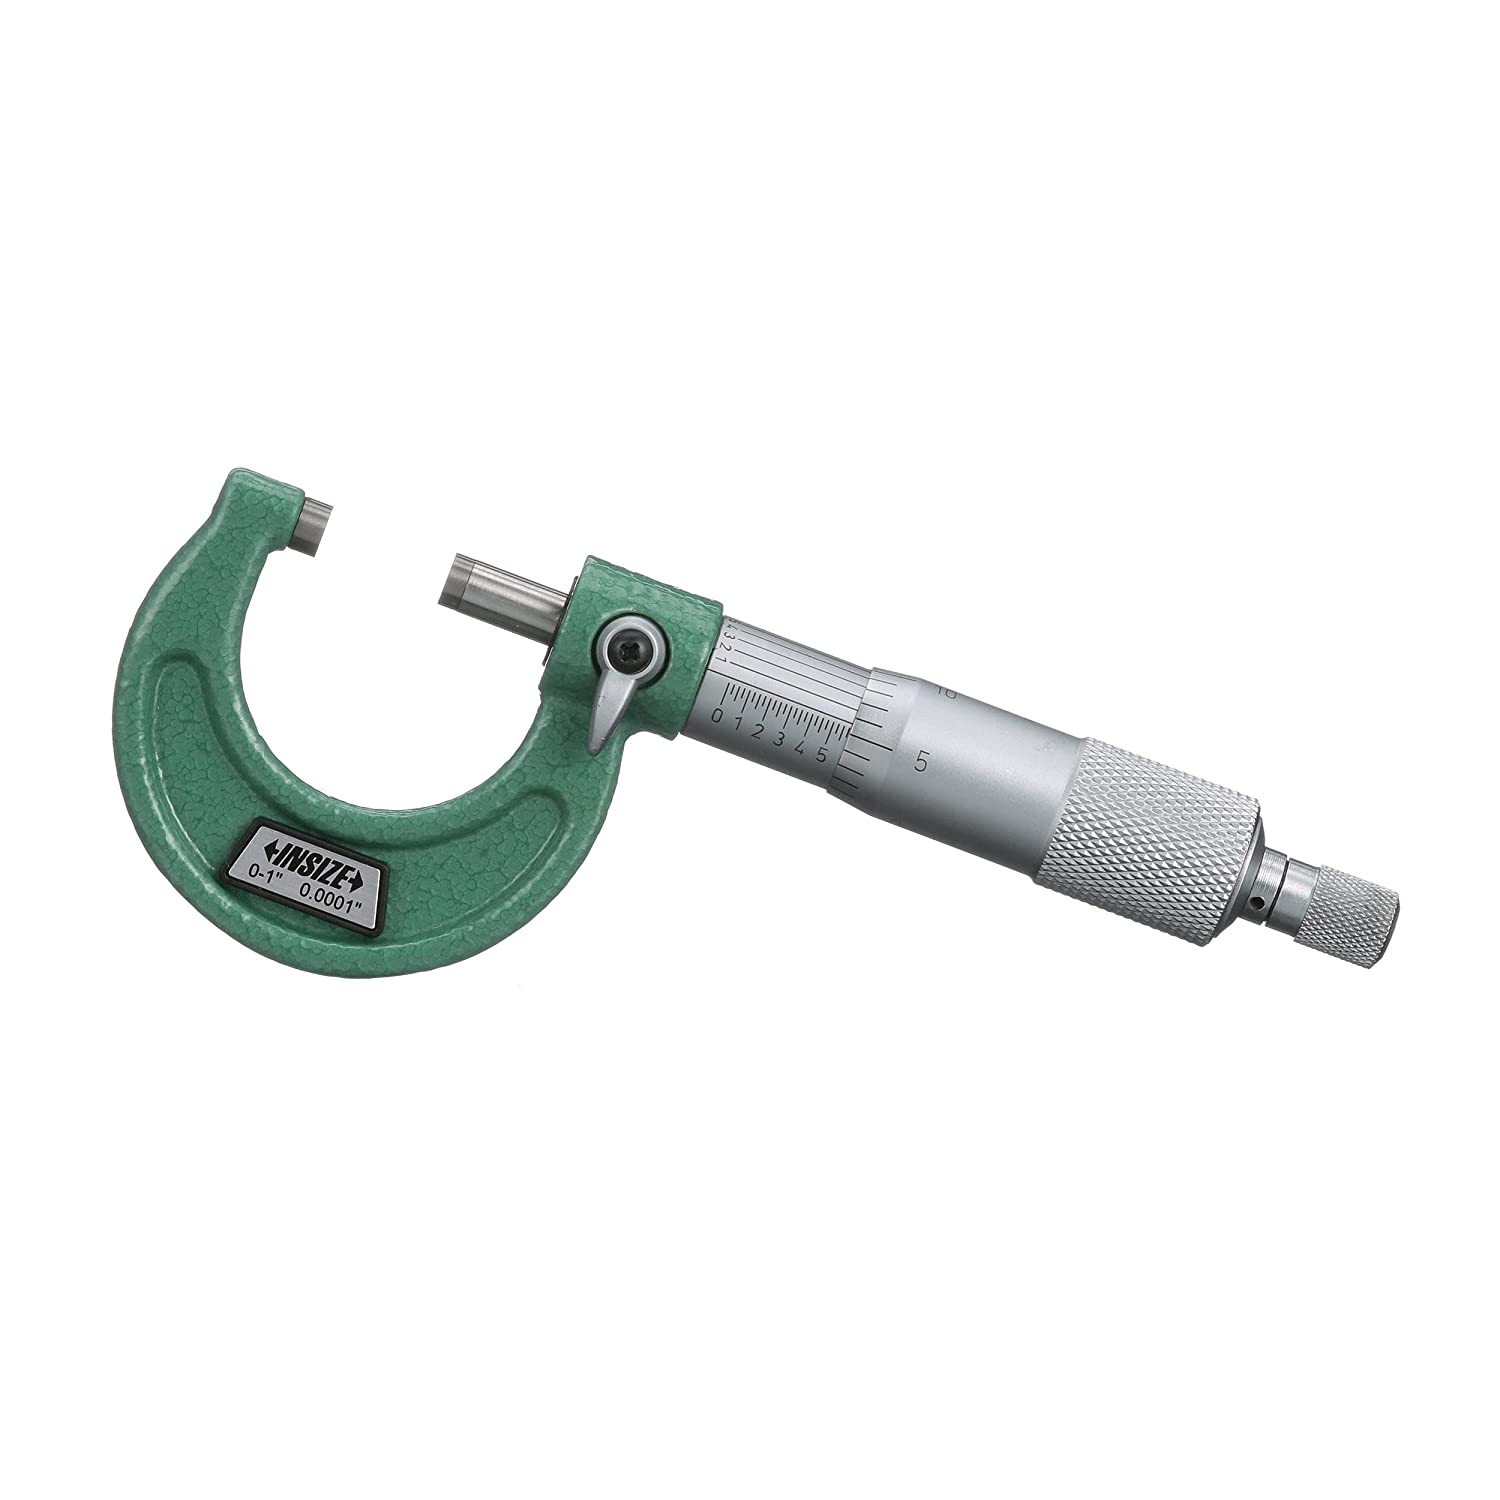 Micrometer 2" to 3" Range Ratchet Stop Outside 